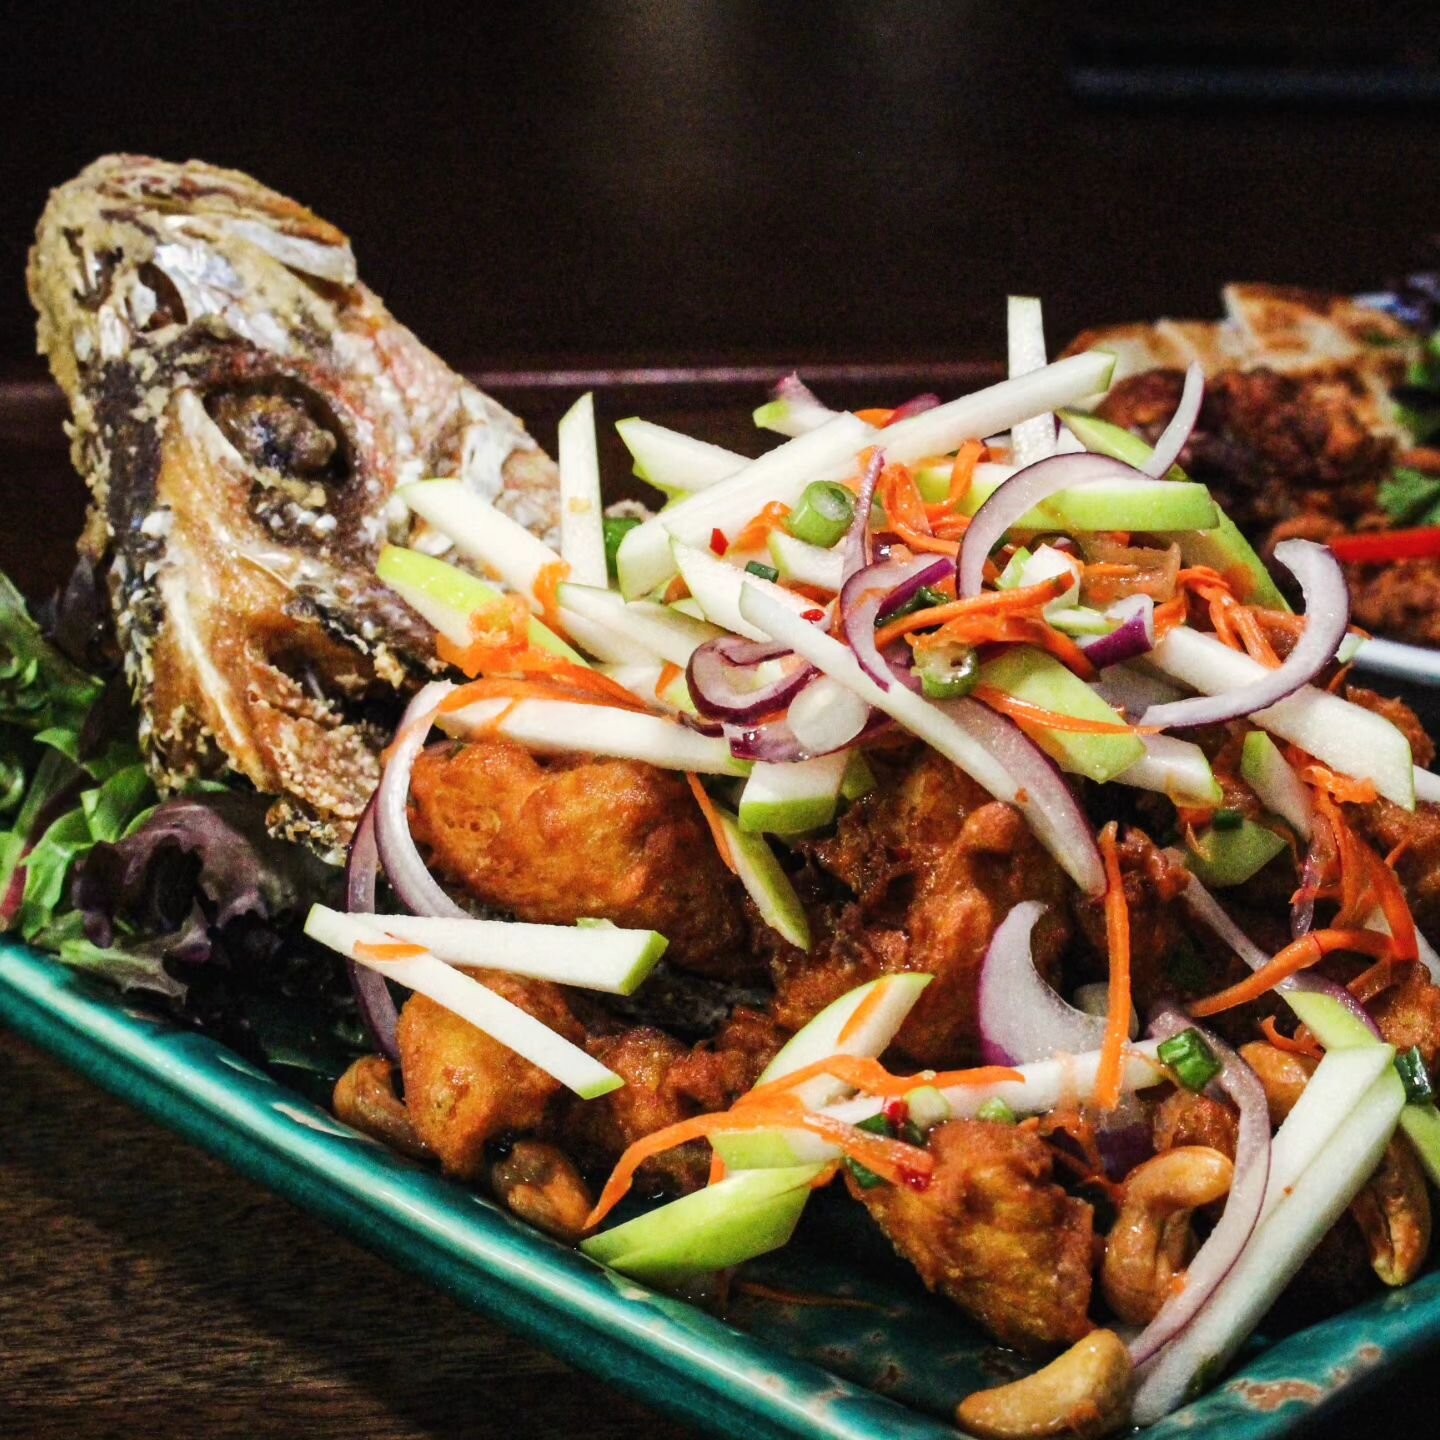 Feast your 👀 on our Catch of the Day! Fish lovers rejoice! 😋

🍽 Whole crispy fried fish, green apple, carrots, red and green onions, topped with cashew, chili, and lime dressing, served with butterfly pea flower rice.

Fun fact: Fish in Thai (ปลา)